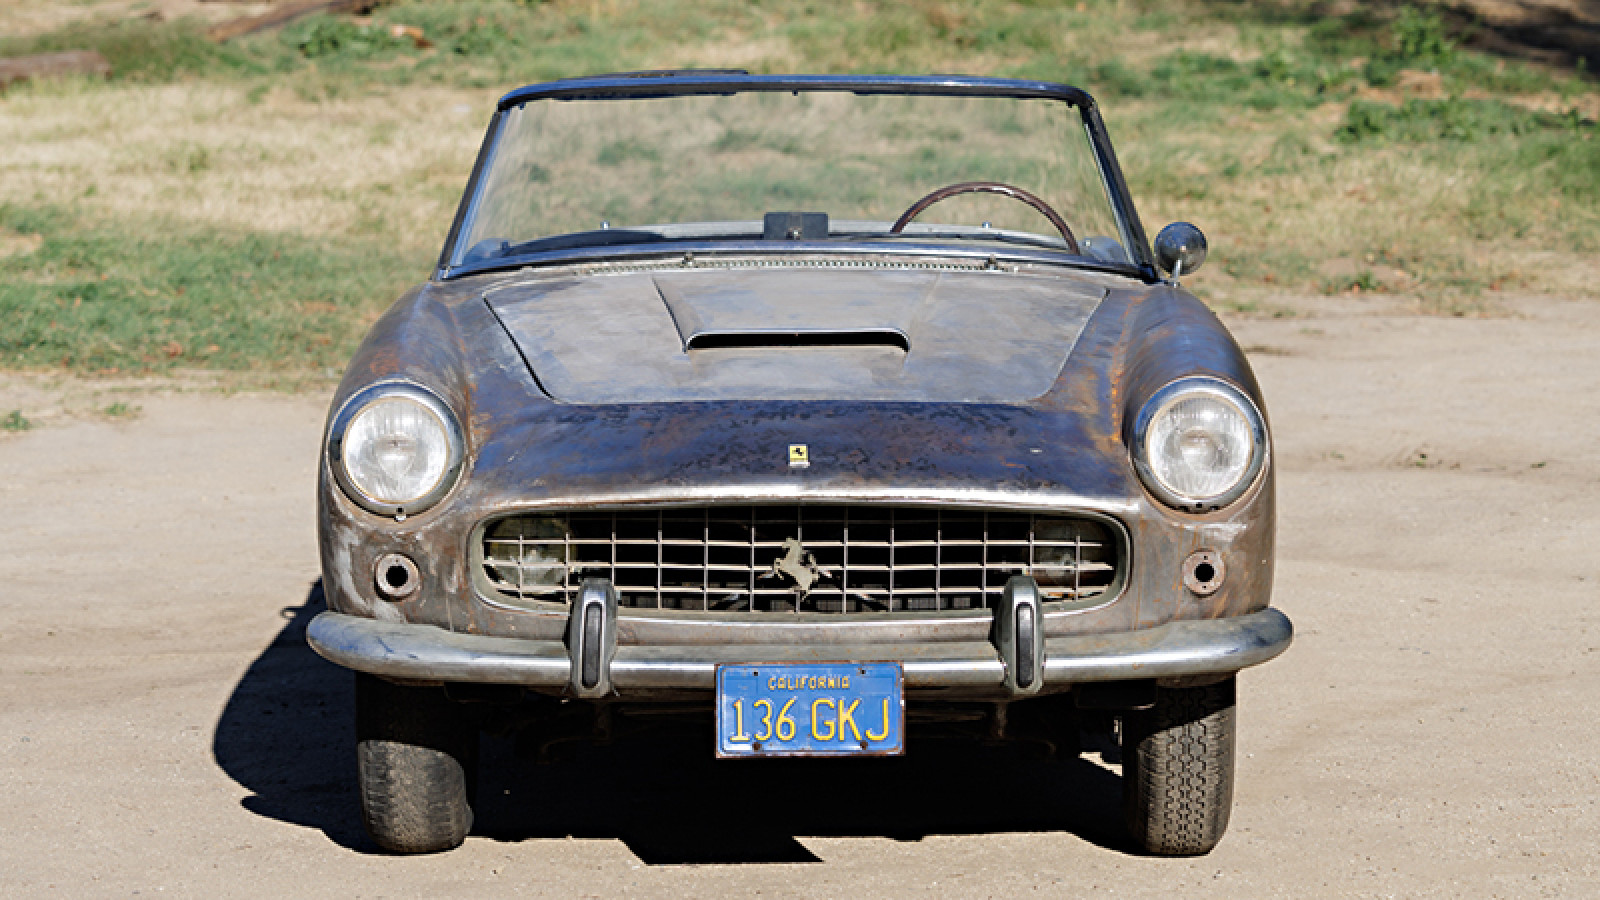 This barn-find Ferrari was a film star – now it’s for sale